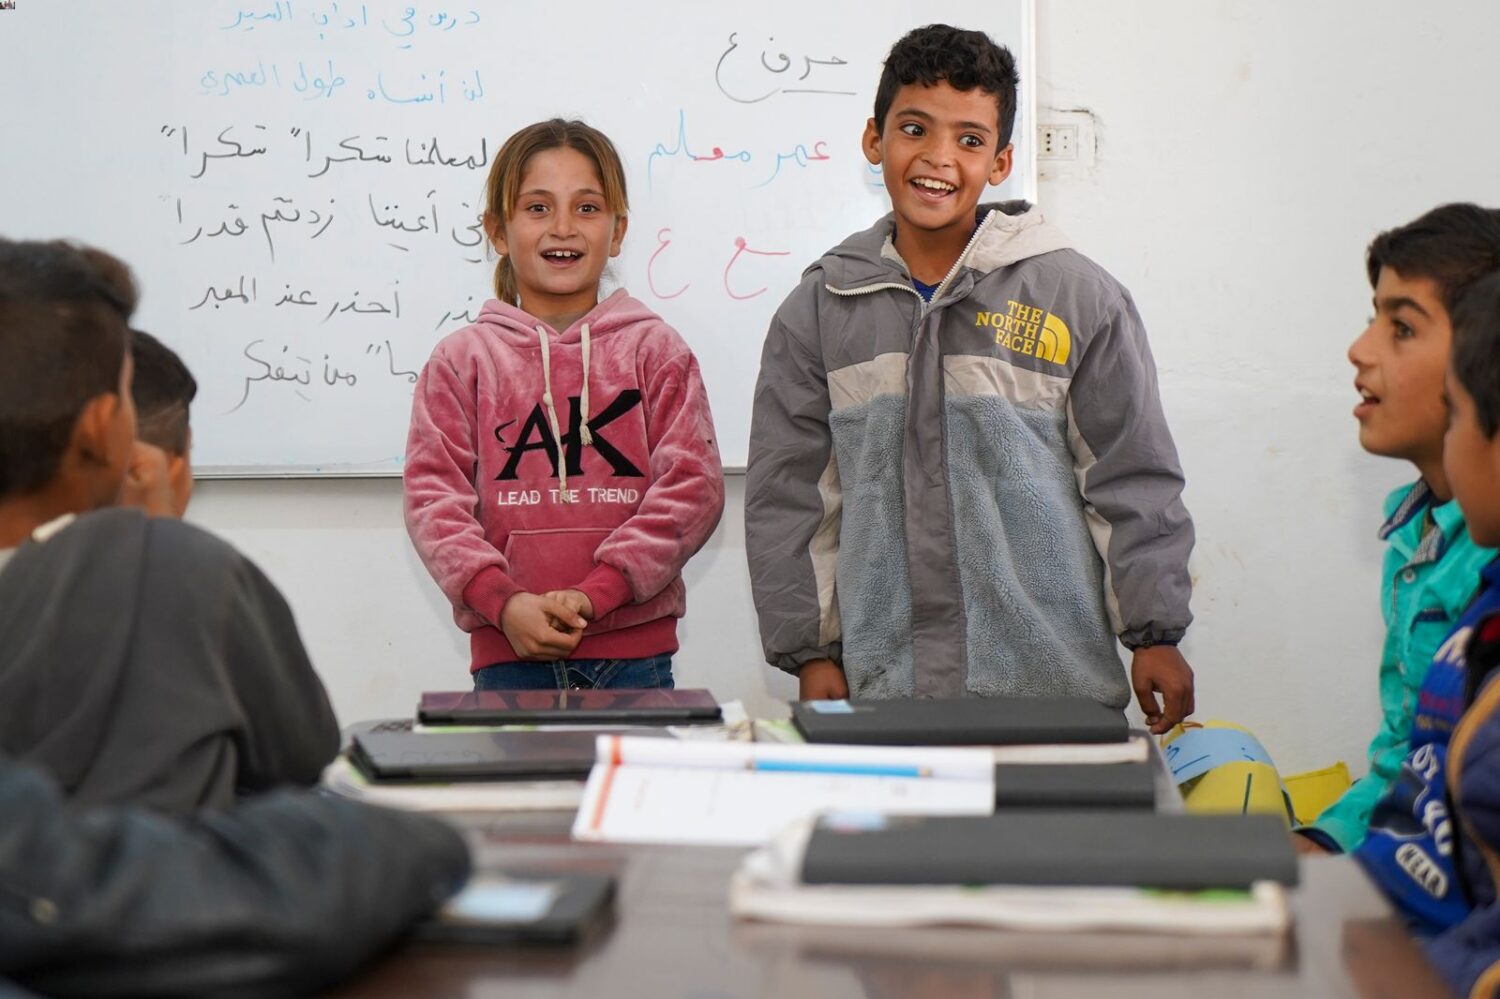 Children in Northeast Syria present in front of a class where the children learn on tablets, which offer a more accessible way of learning.